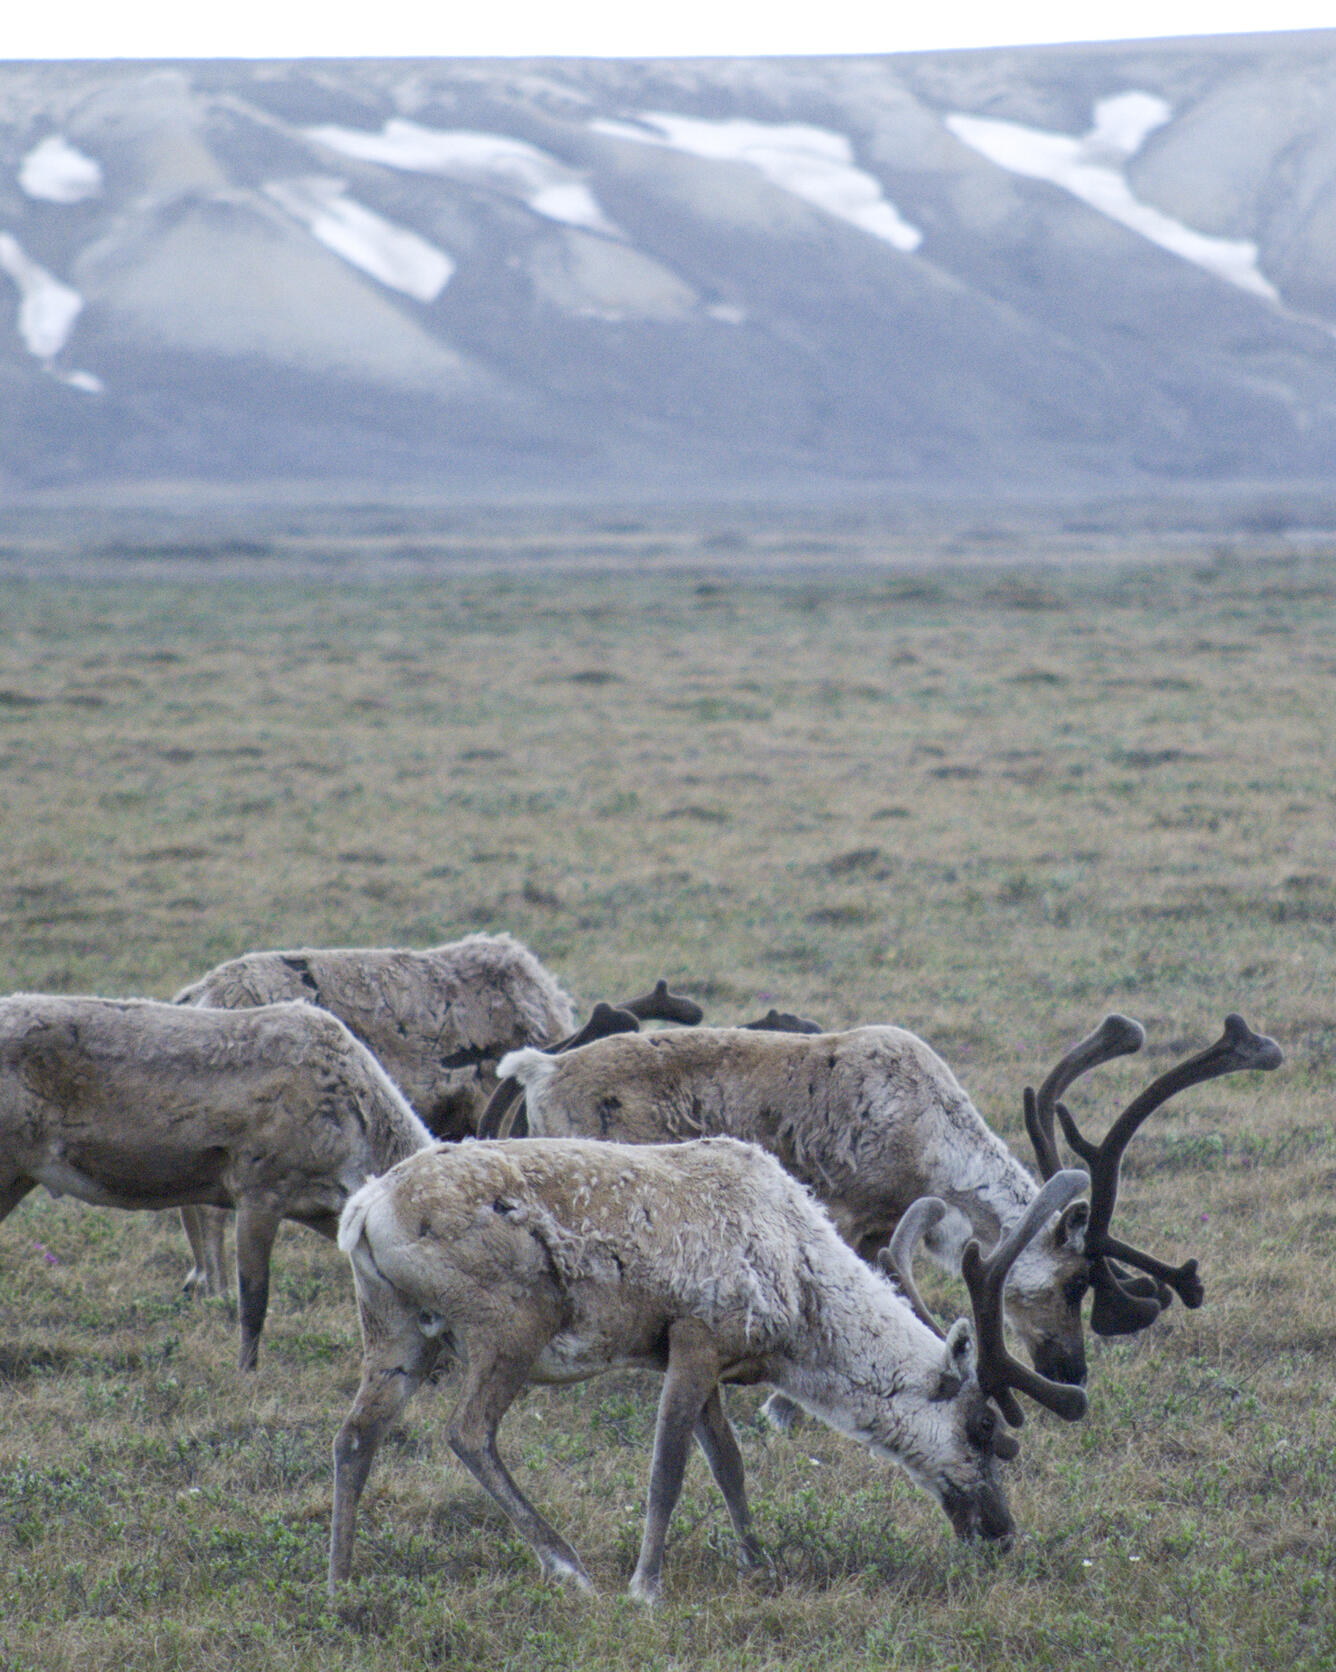 Caribou grazing near the Dalton Highway in the northern part of Alaska.